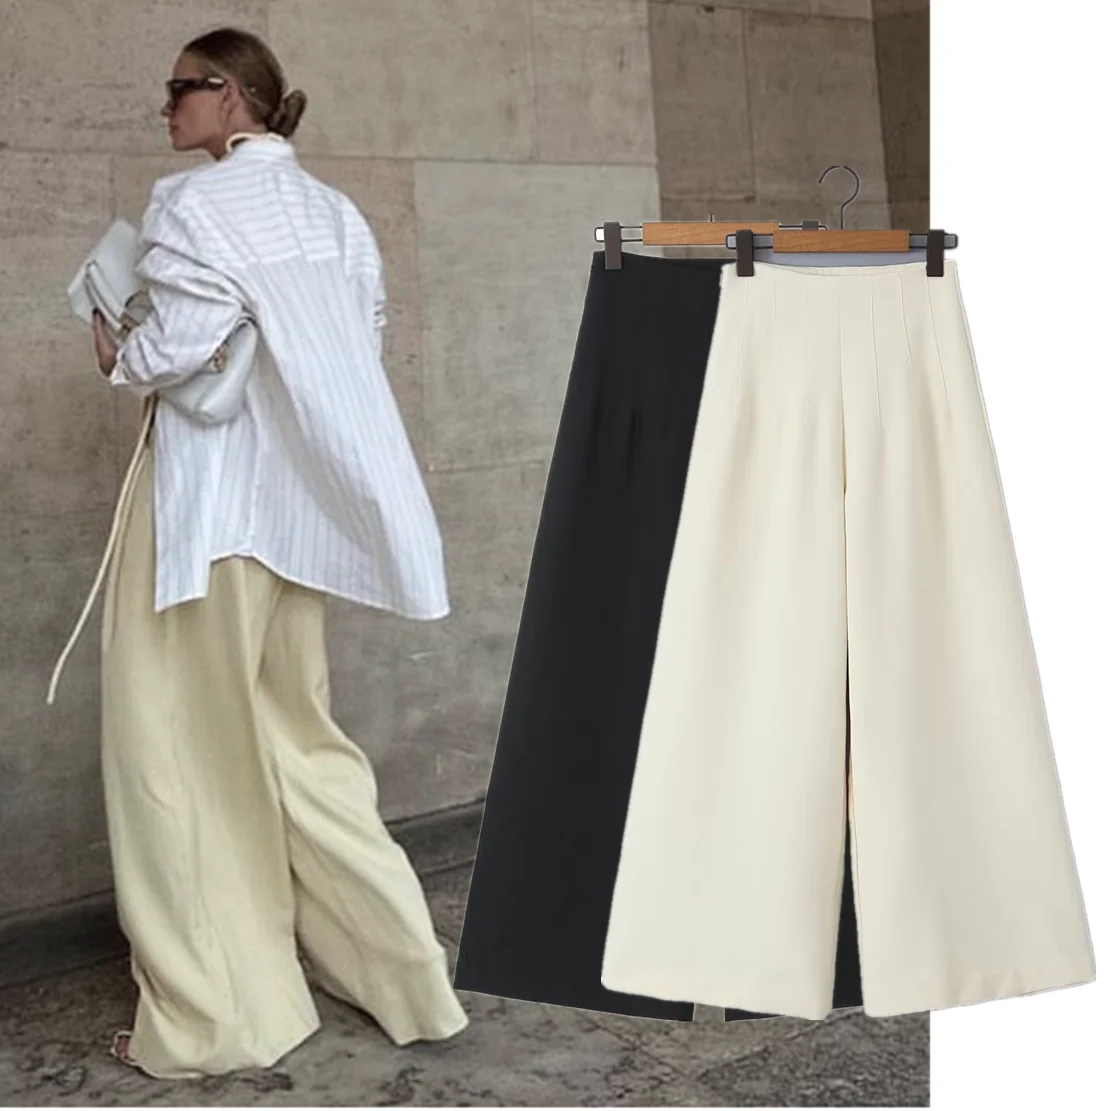 Maxdutti 2024 New Arrival Ins Fashion Blogger Retro High Waisted Wide Leg Pants Women Casual Trousers Fashion Ladies Clothes women scarf winter 100% goat cashmere knitting 180 45cm scarves new arrival best quality soft and fashion scarf for ladies